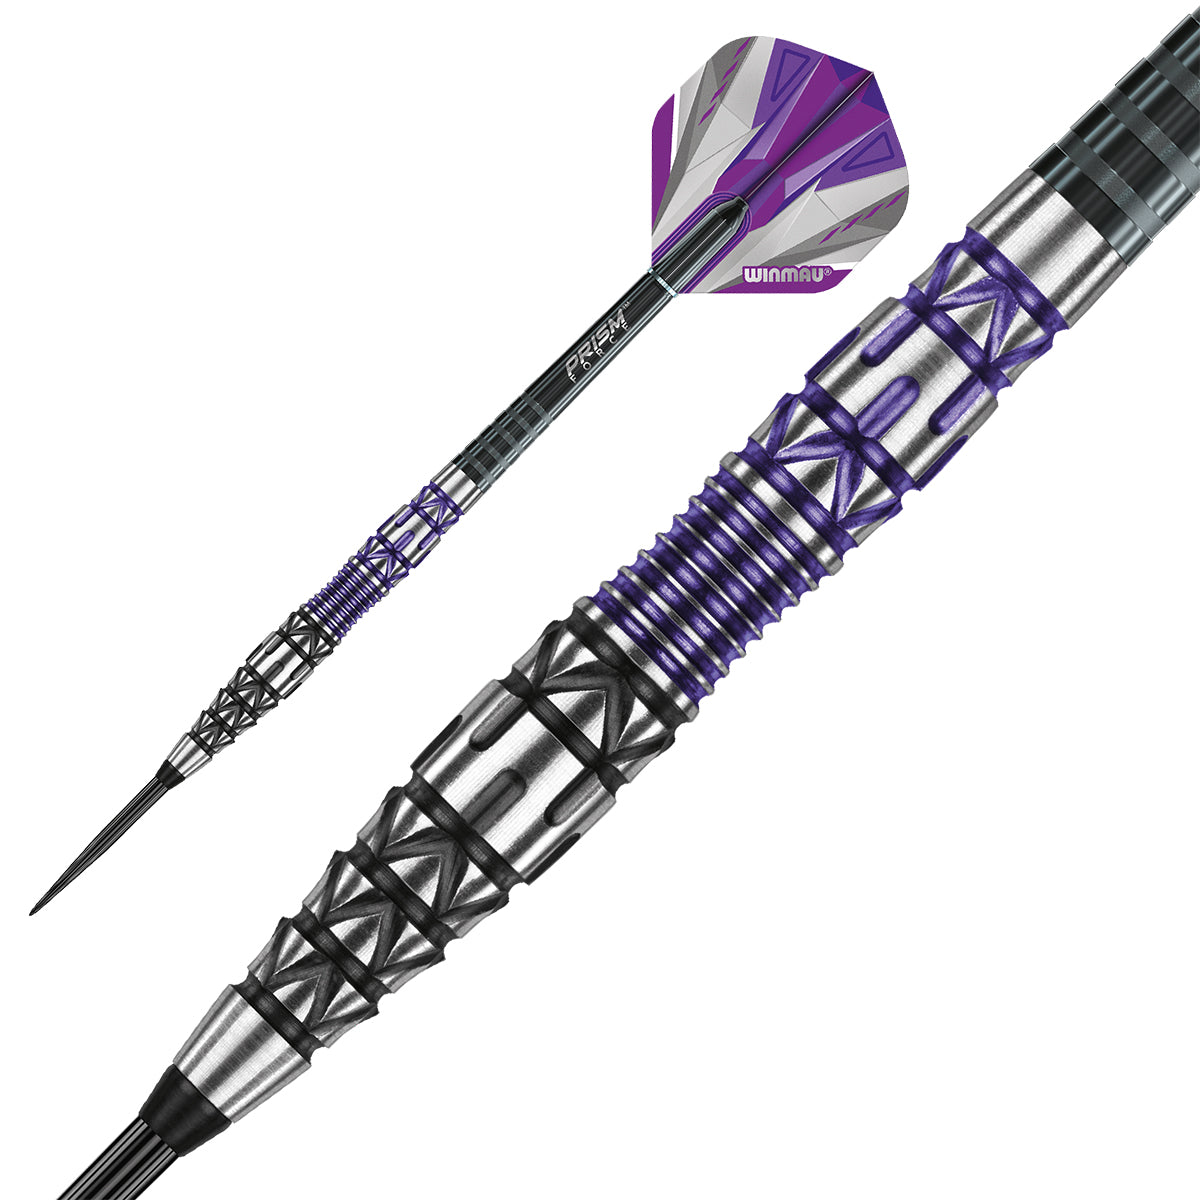 Simon Whitlock Special Edition 90% Tungsten Steel Tip Darts by